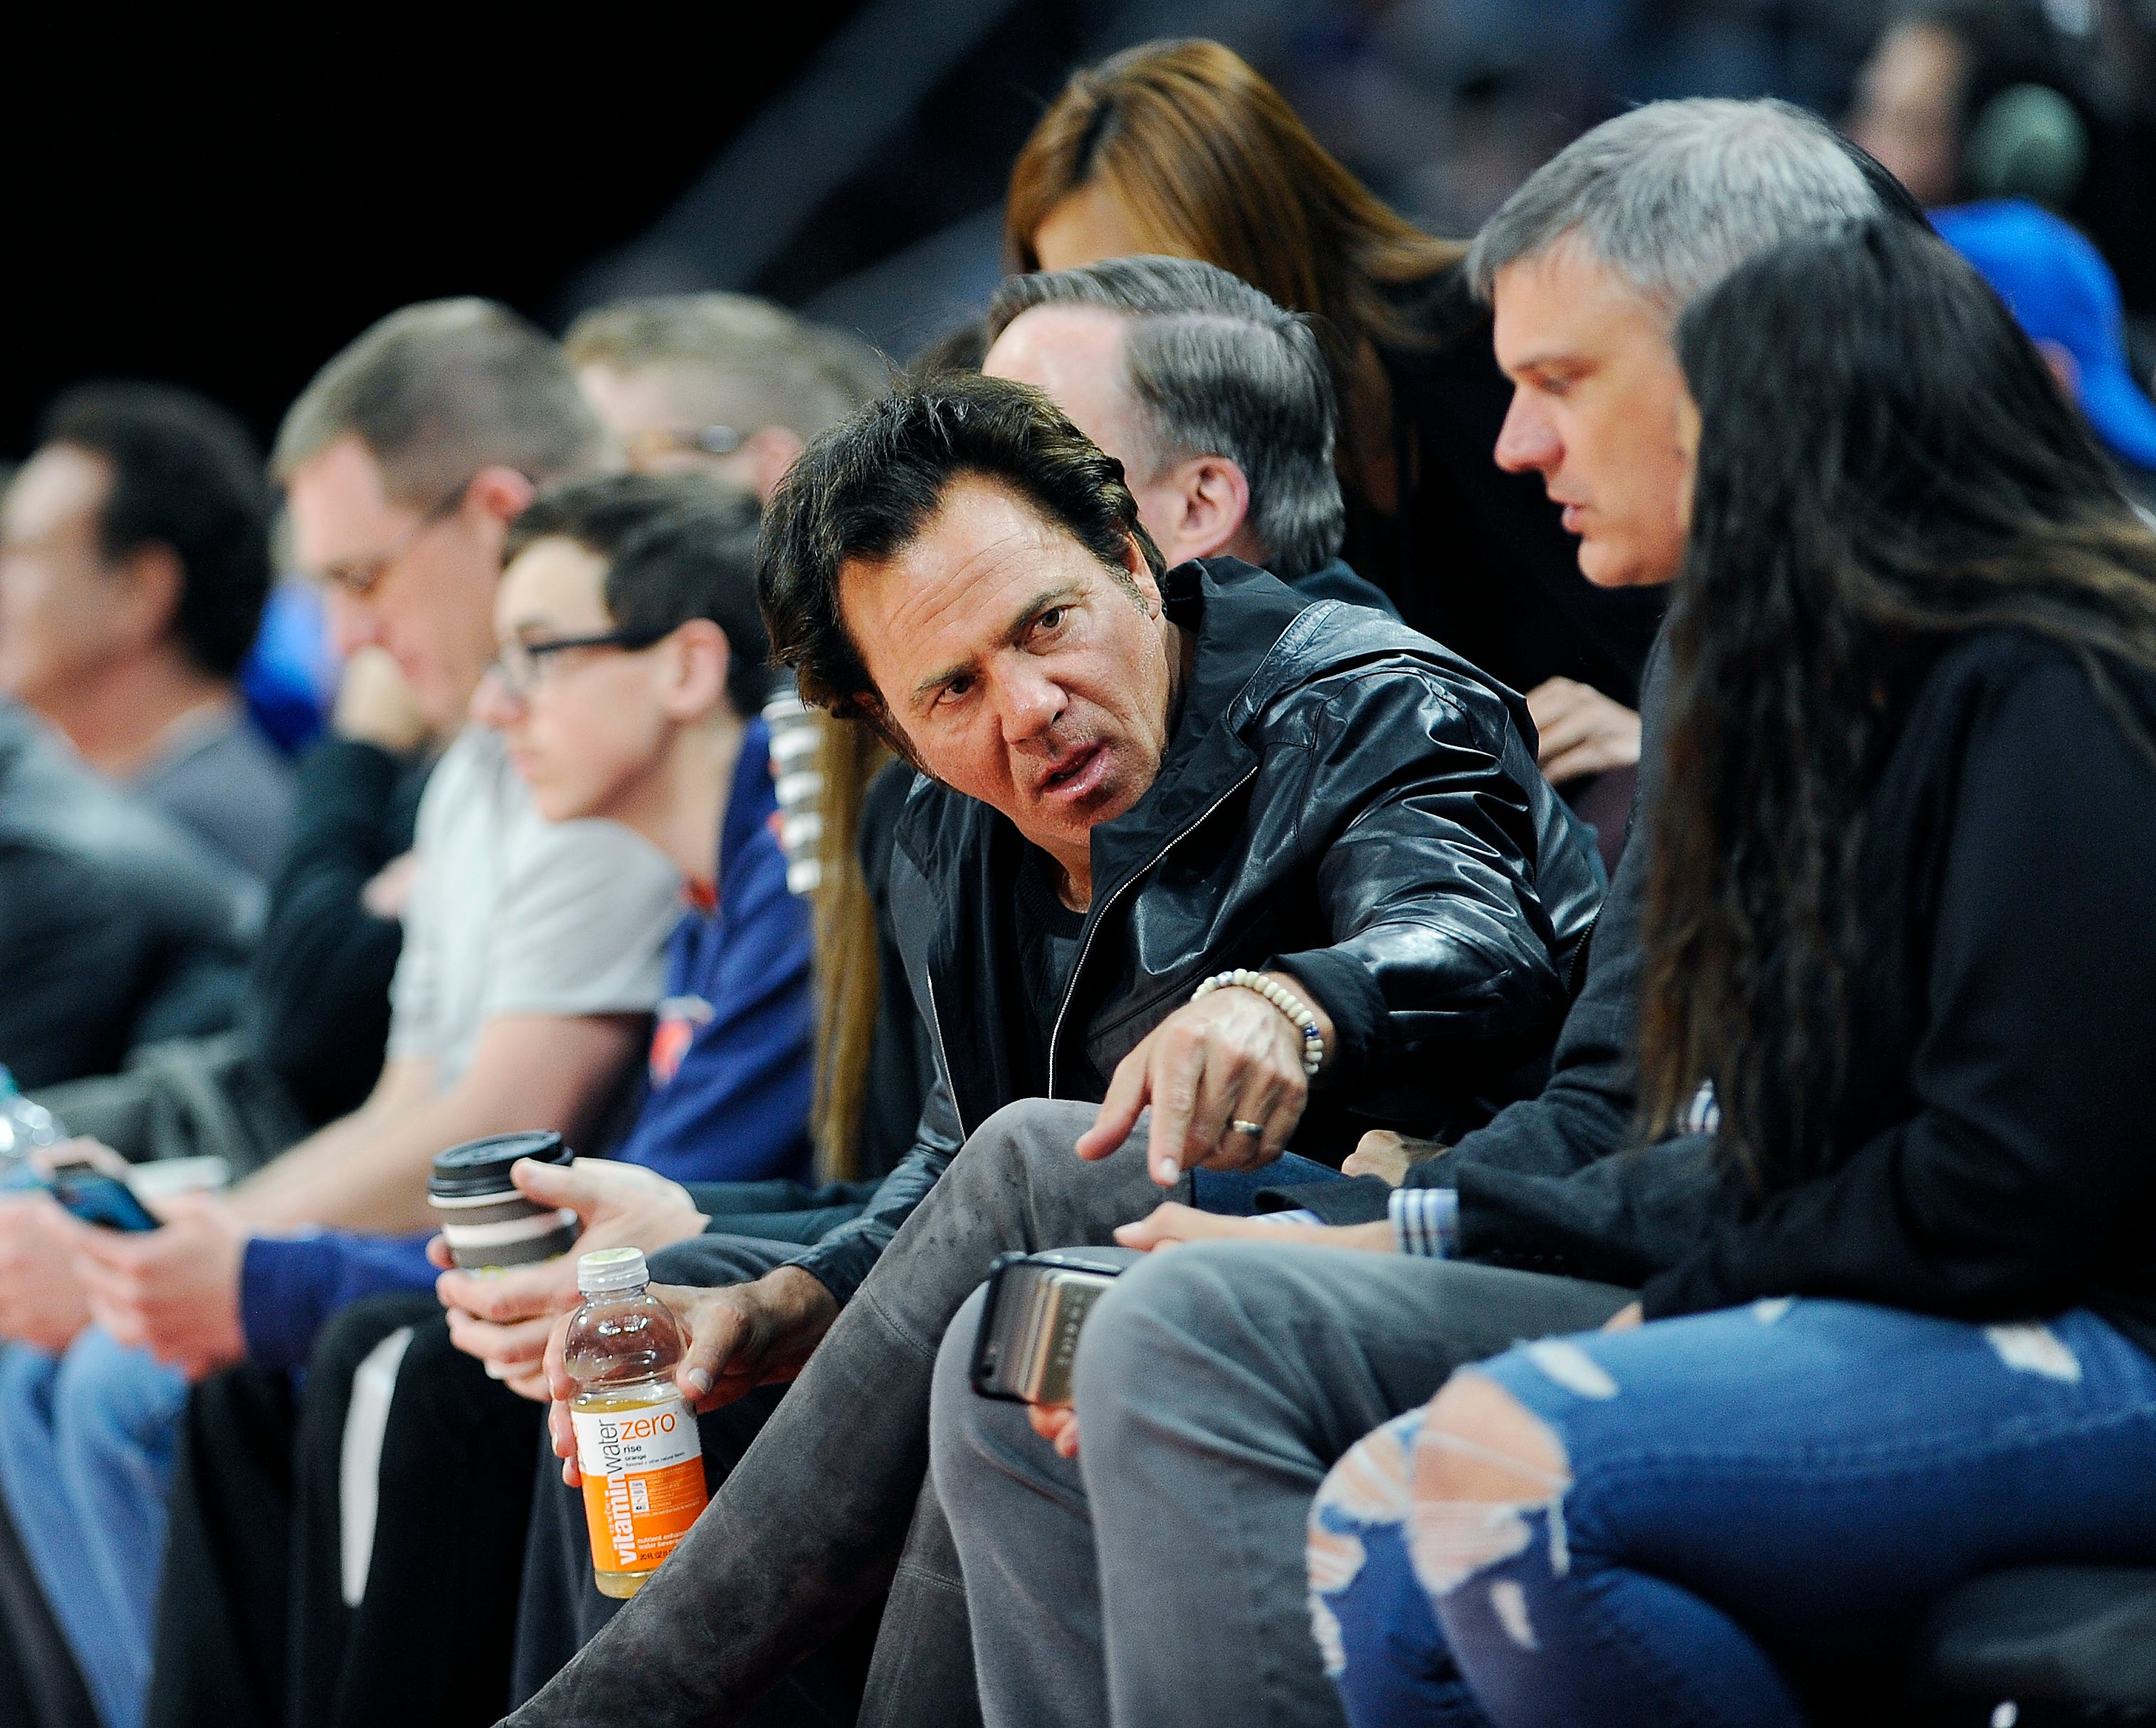 Tom Gores had a team meeting on Tuesday to discuss some of the issues and to give them his support. He said all of the players and staff showed up and it was a positive exchange.